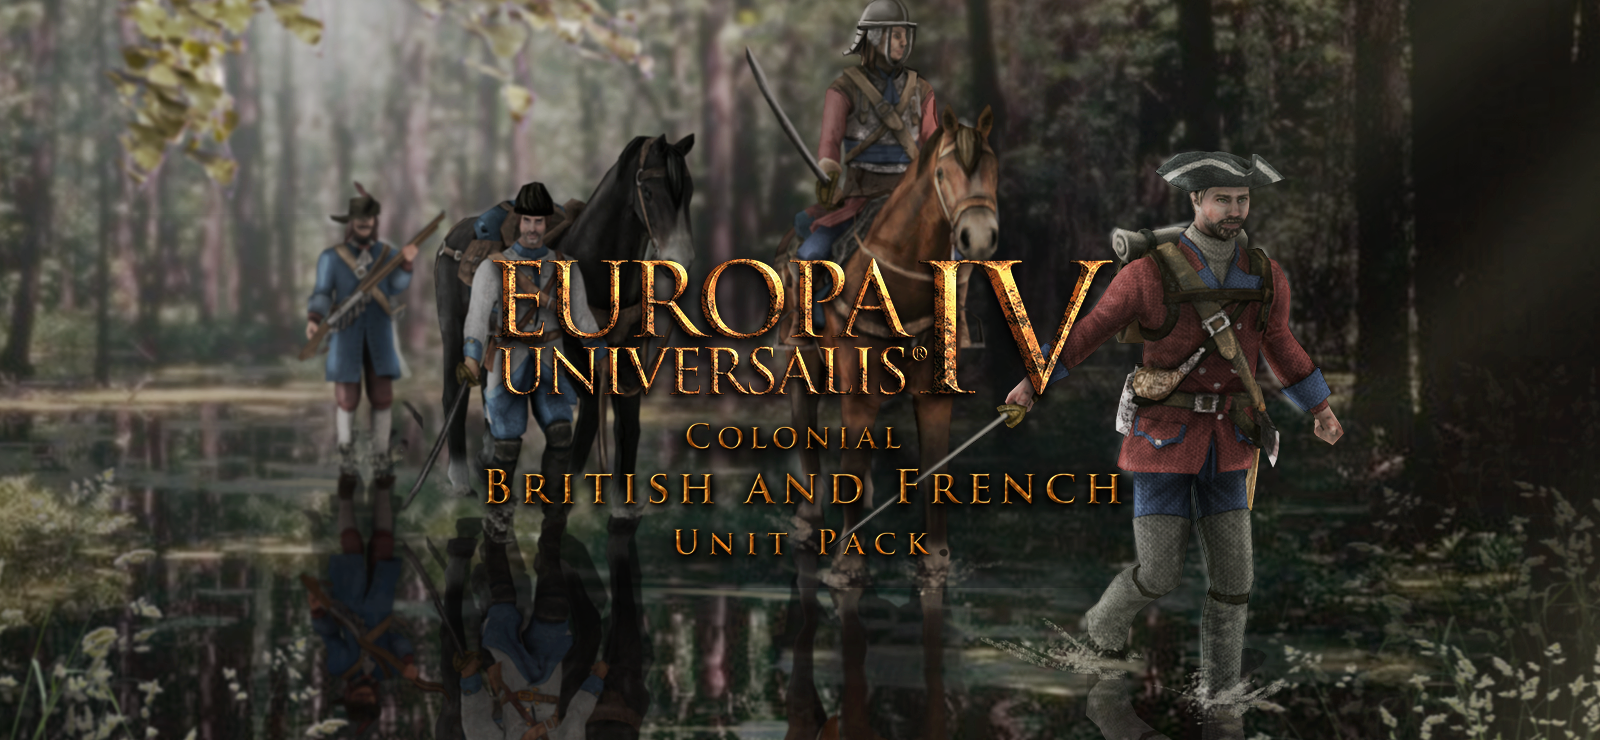 Europa Universalis IV: Colonial British And French Unit Pack